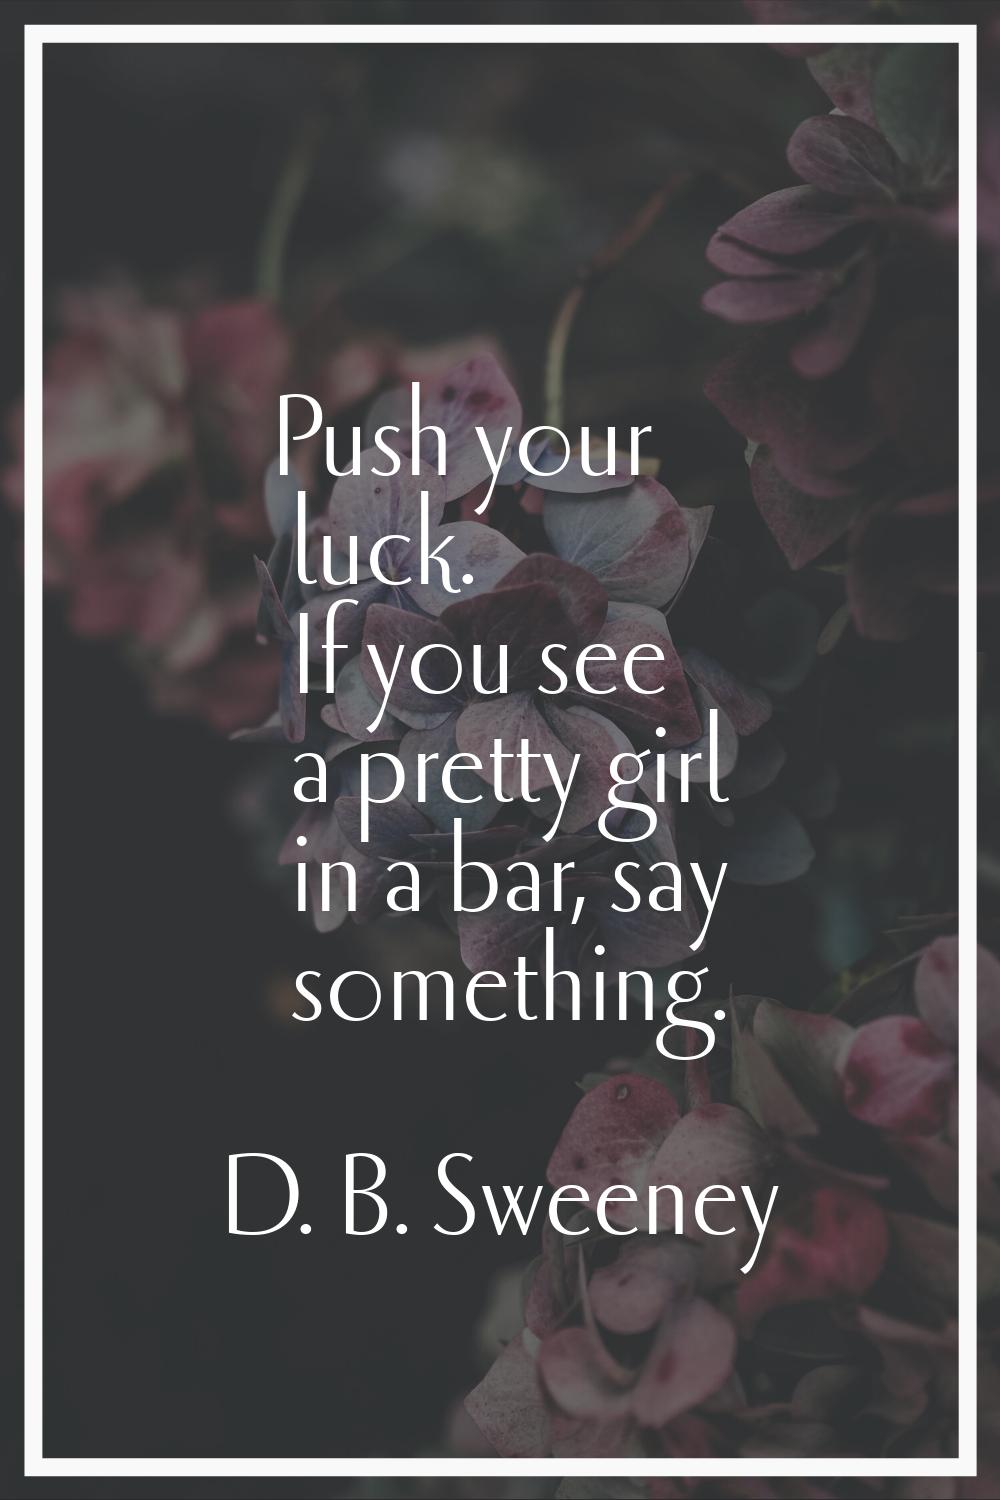 Push your luck. If you see a pretty girl in a bar, say something.